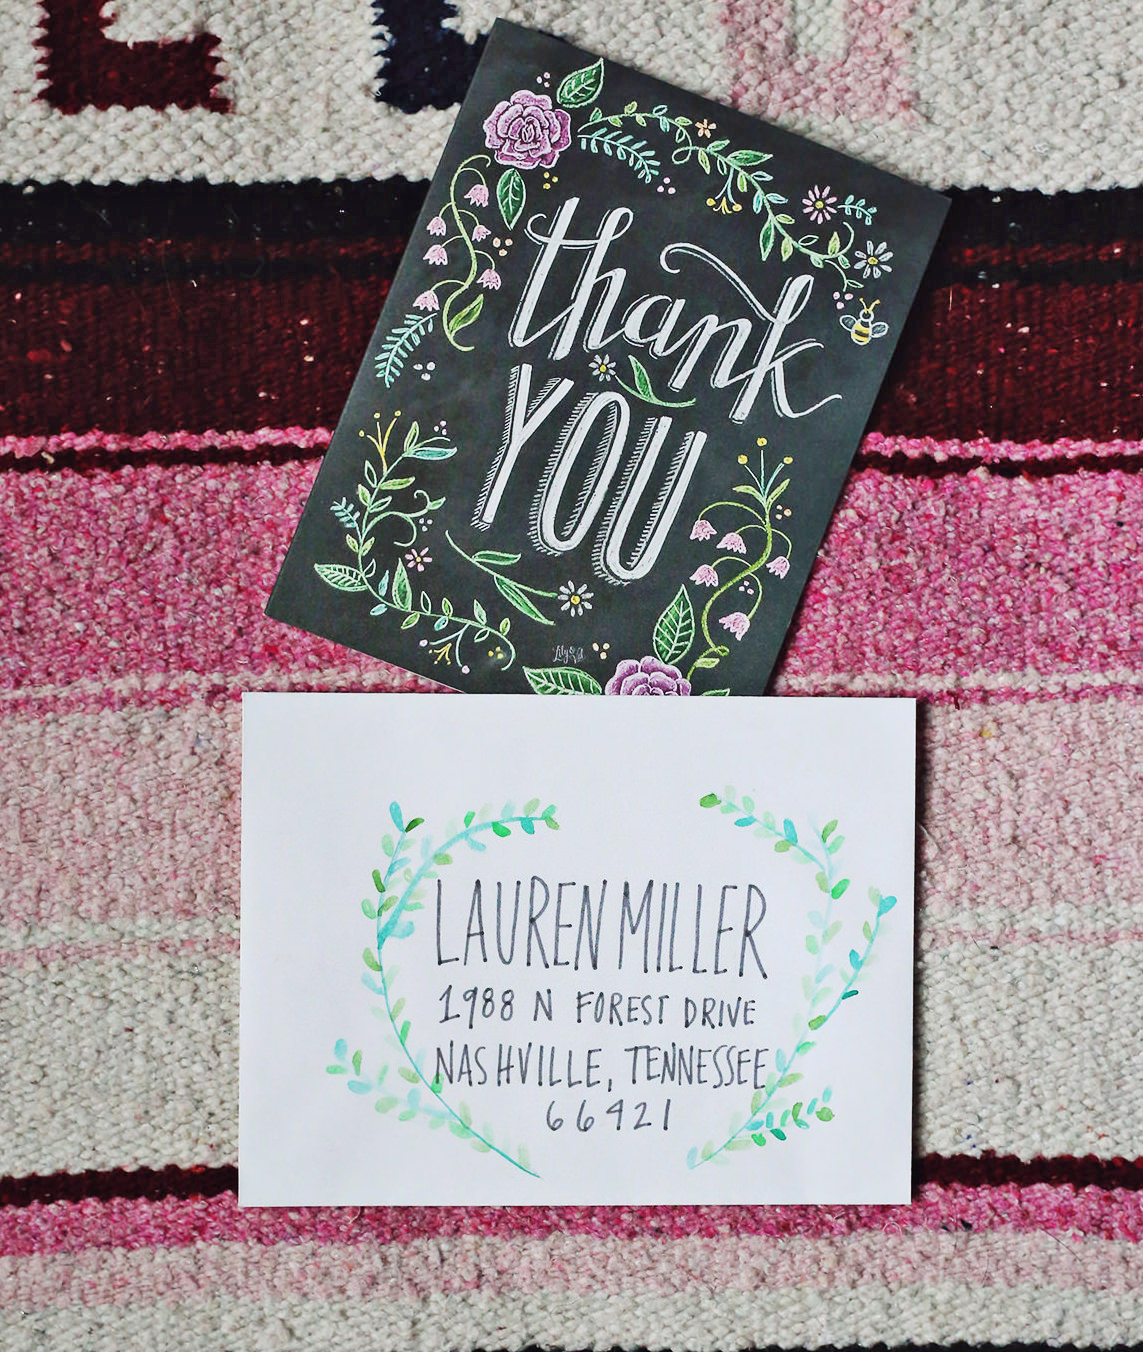 Watercolor laurels are the perfect, artistic touch to complement this Lily & Val floral thank you card